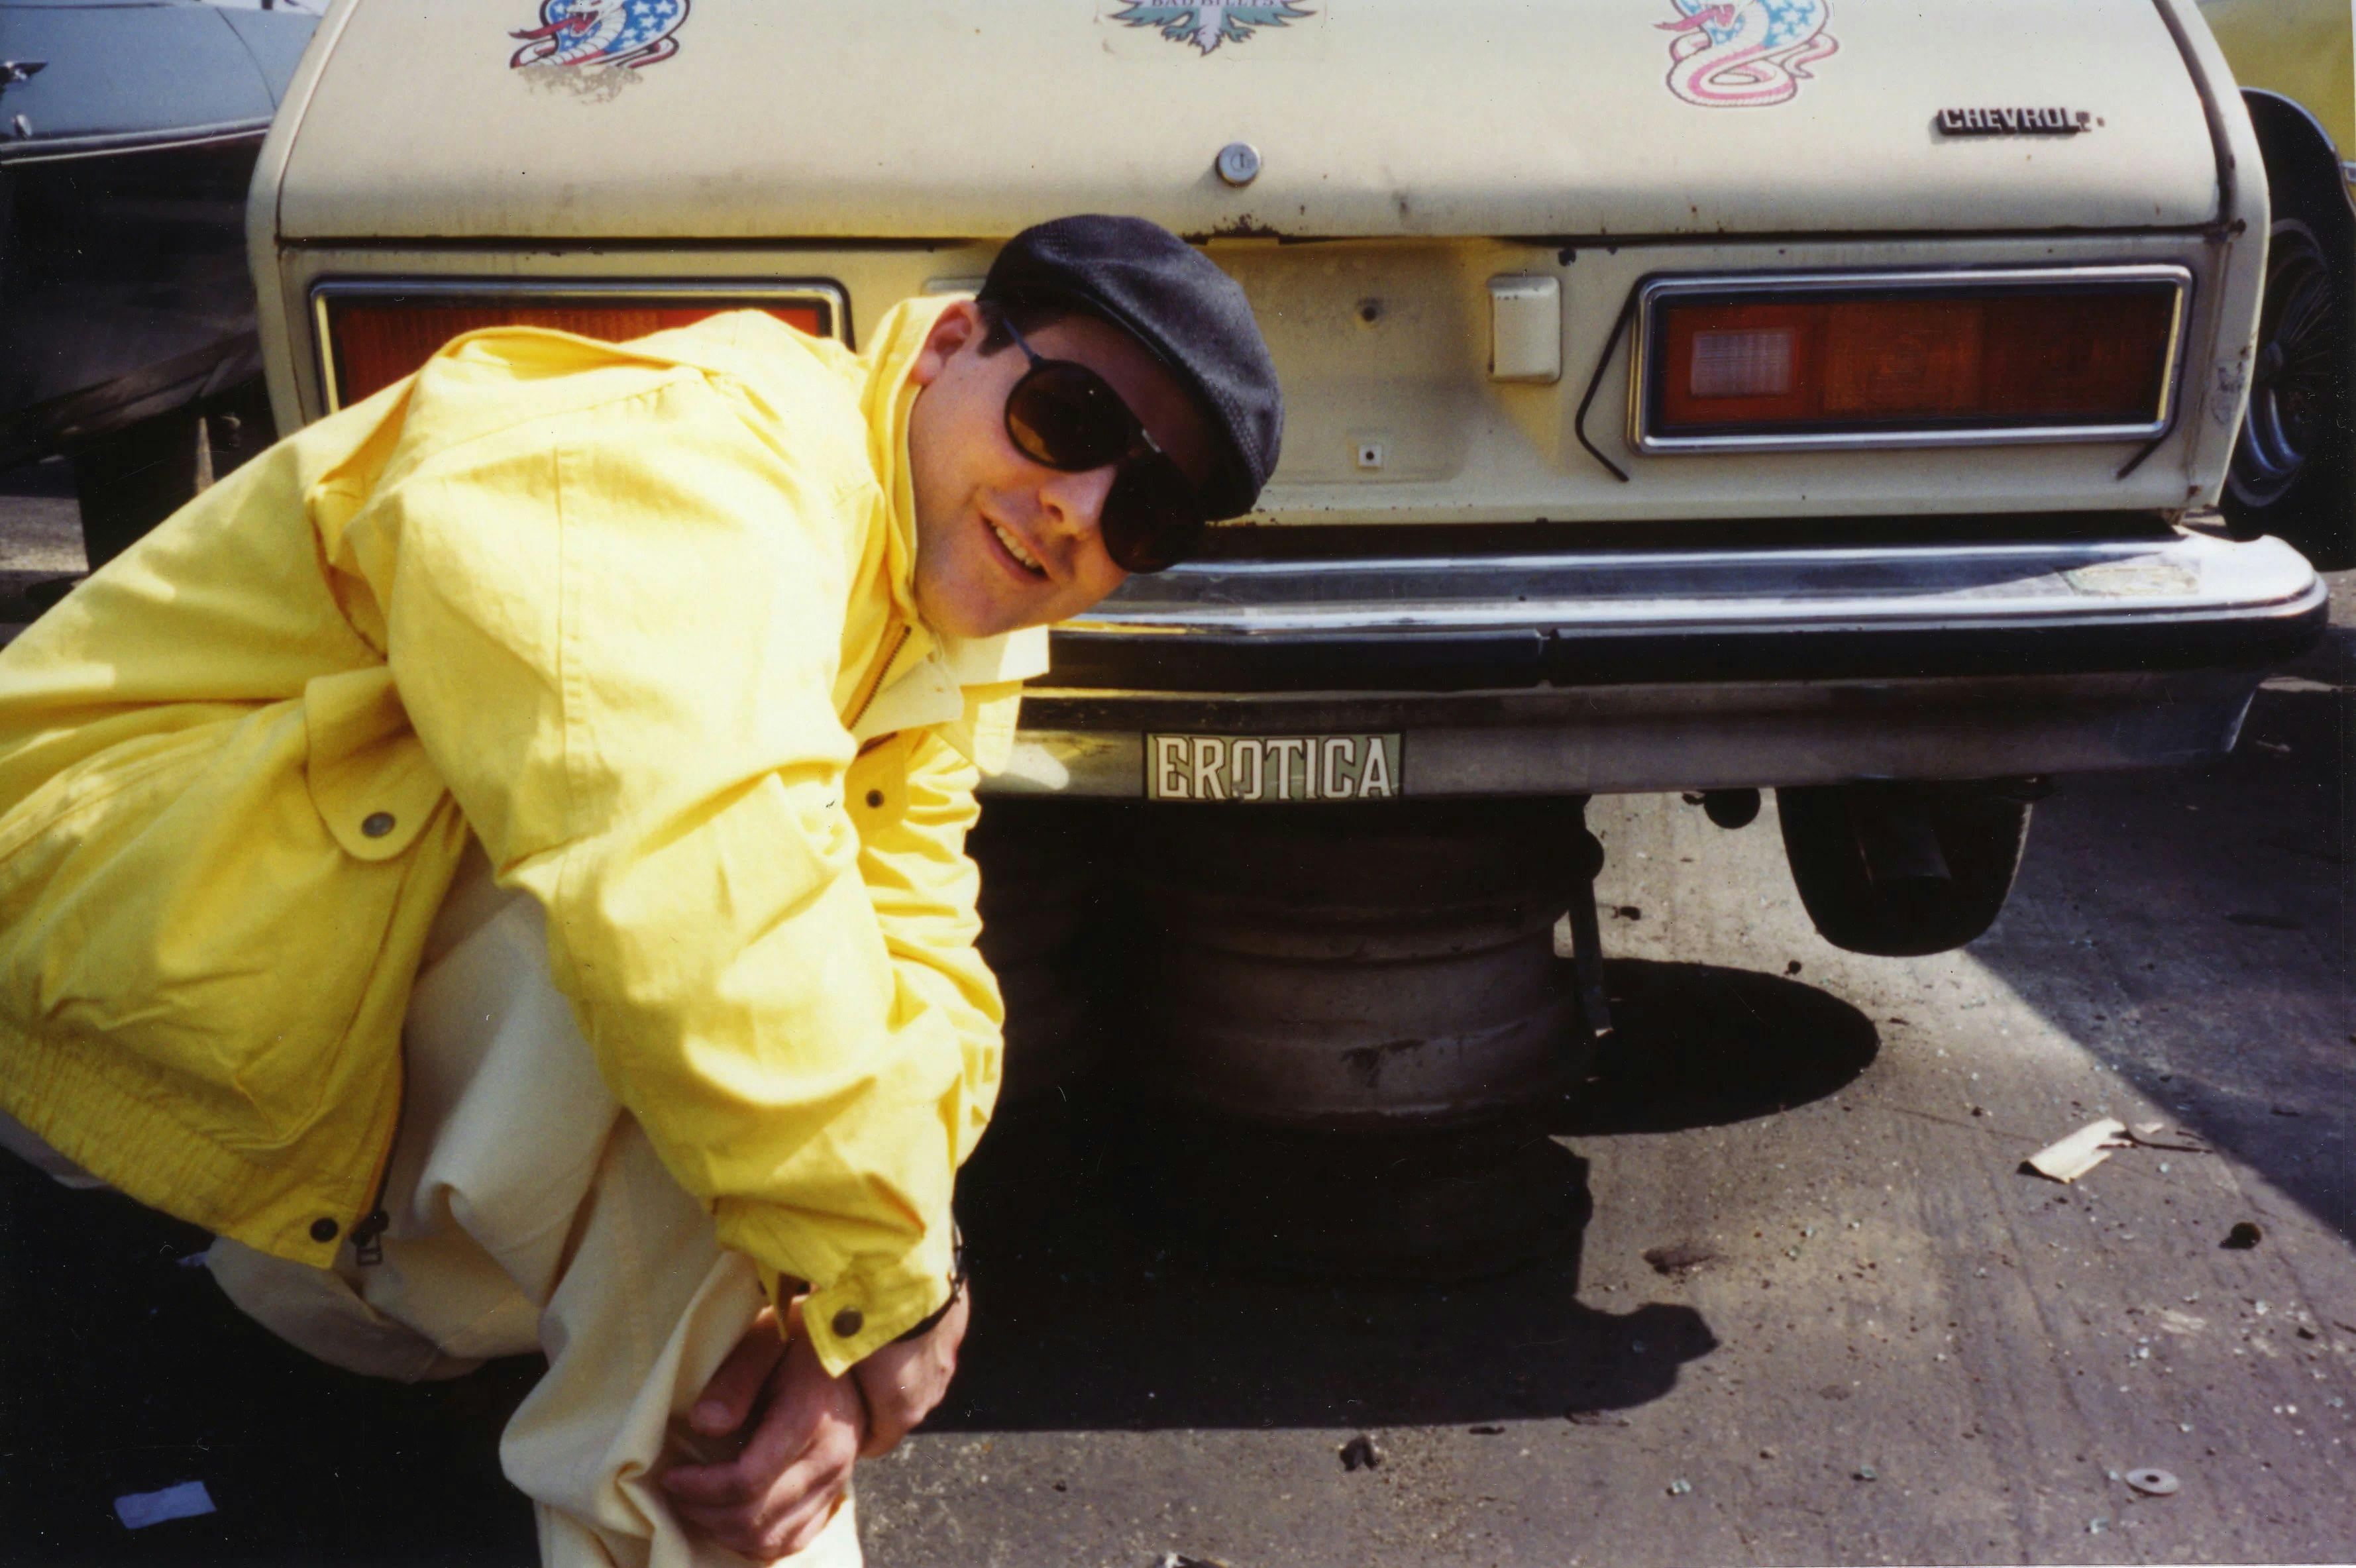 A photo of Jason Rhoades kneeling in front of a car, dated 1994